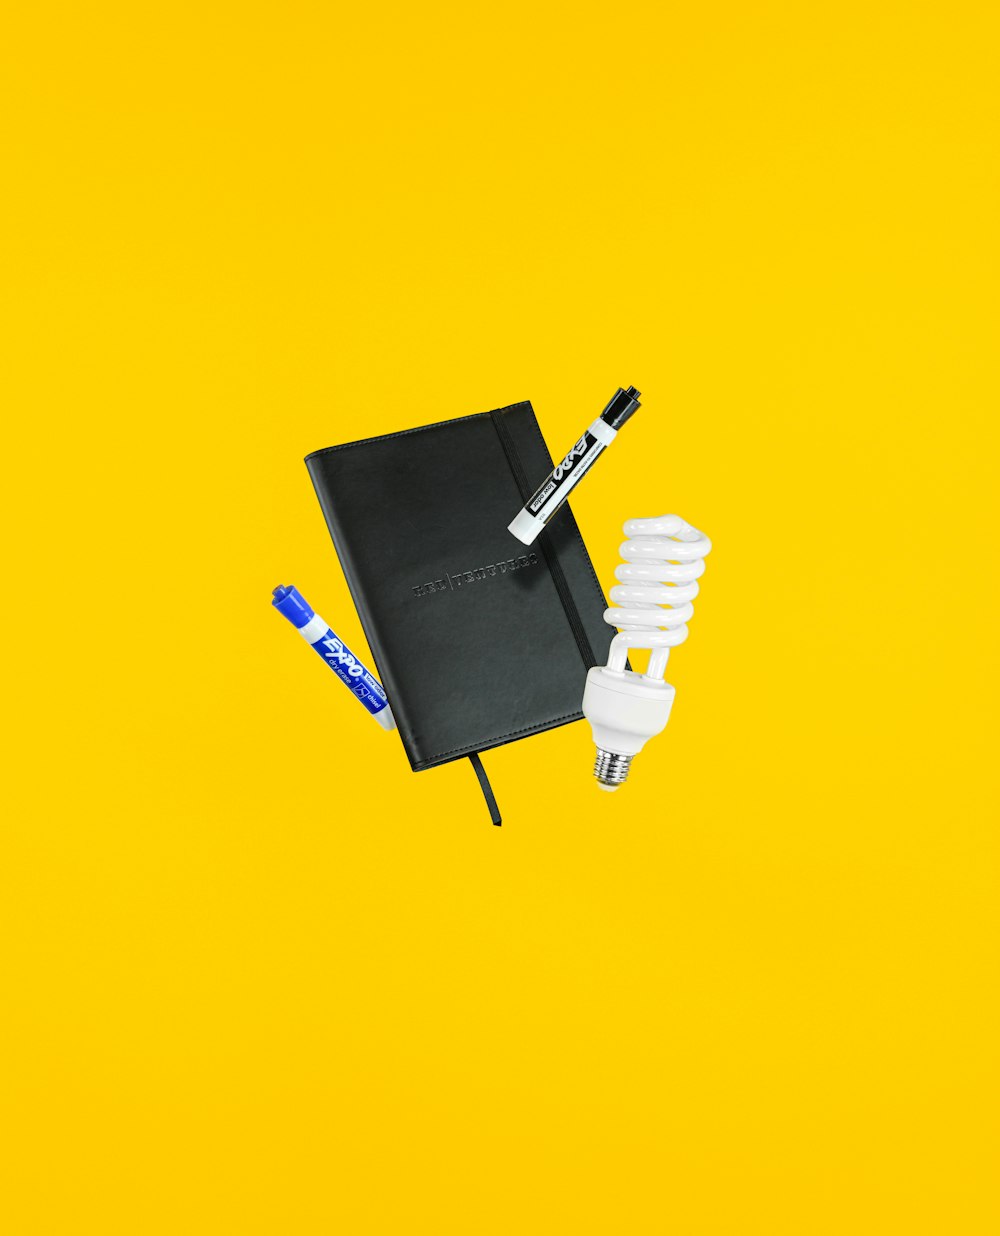 black and blue Expo markers near white CFL bulb and black hardbound book